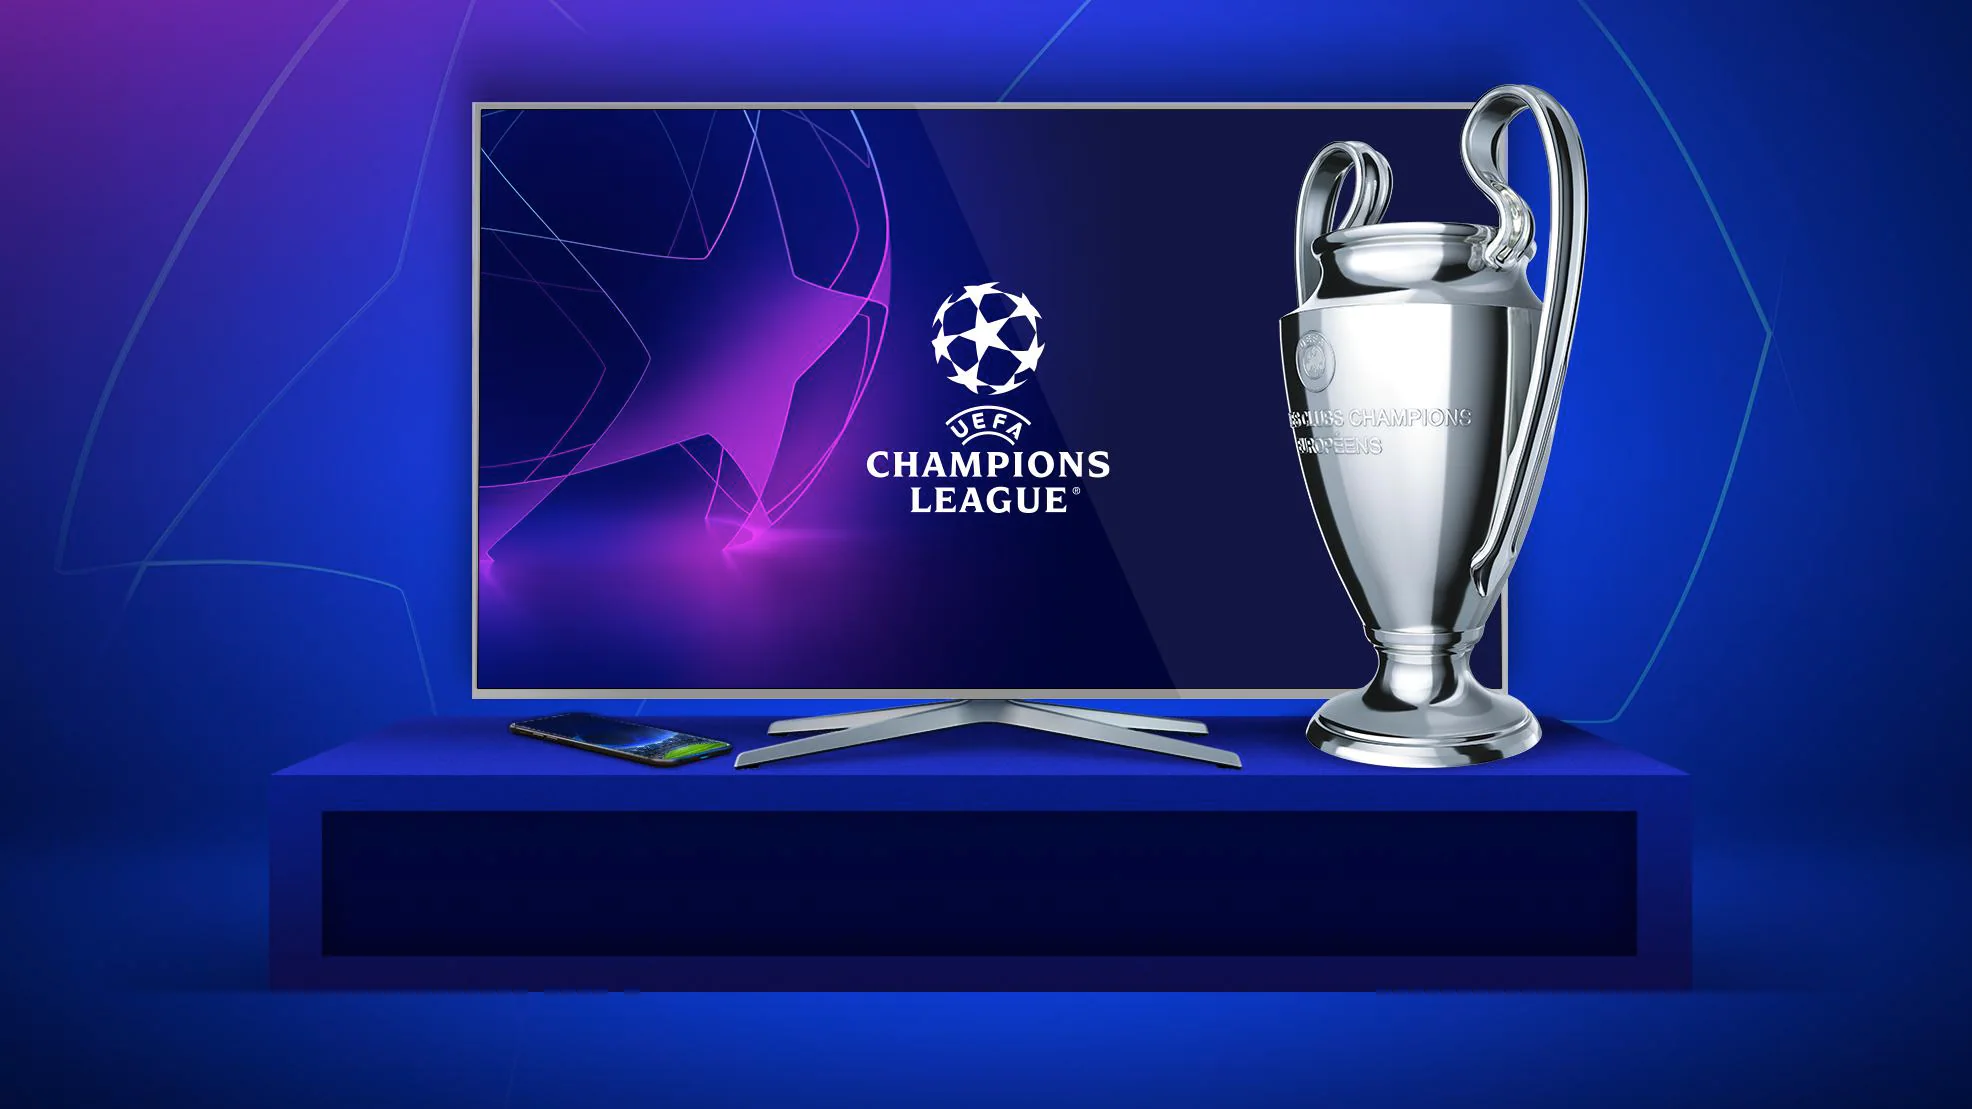  Where to watch UEFA Champions League?  Broadcasters and streaming

